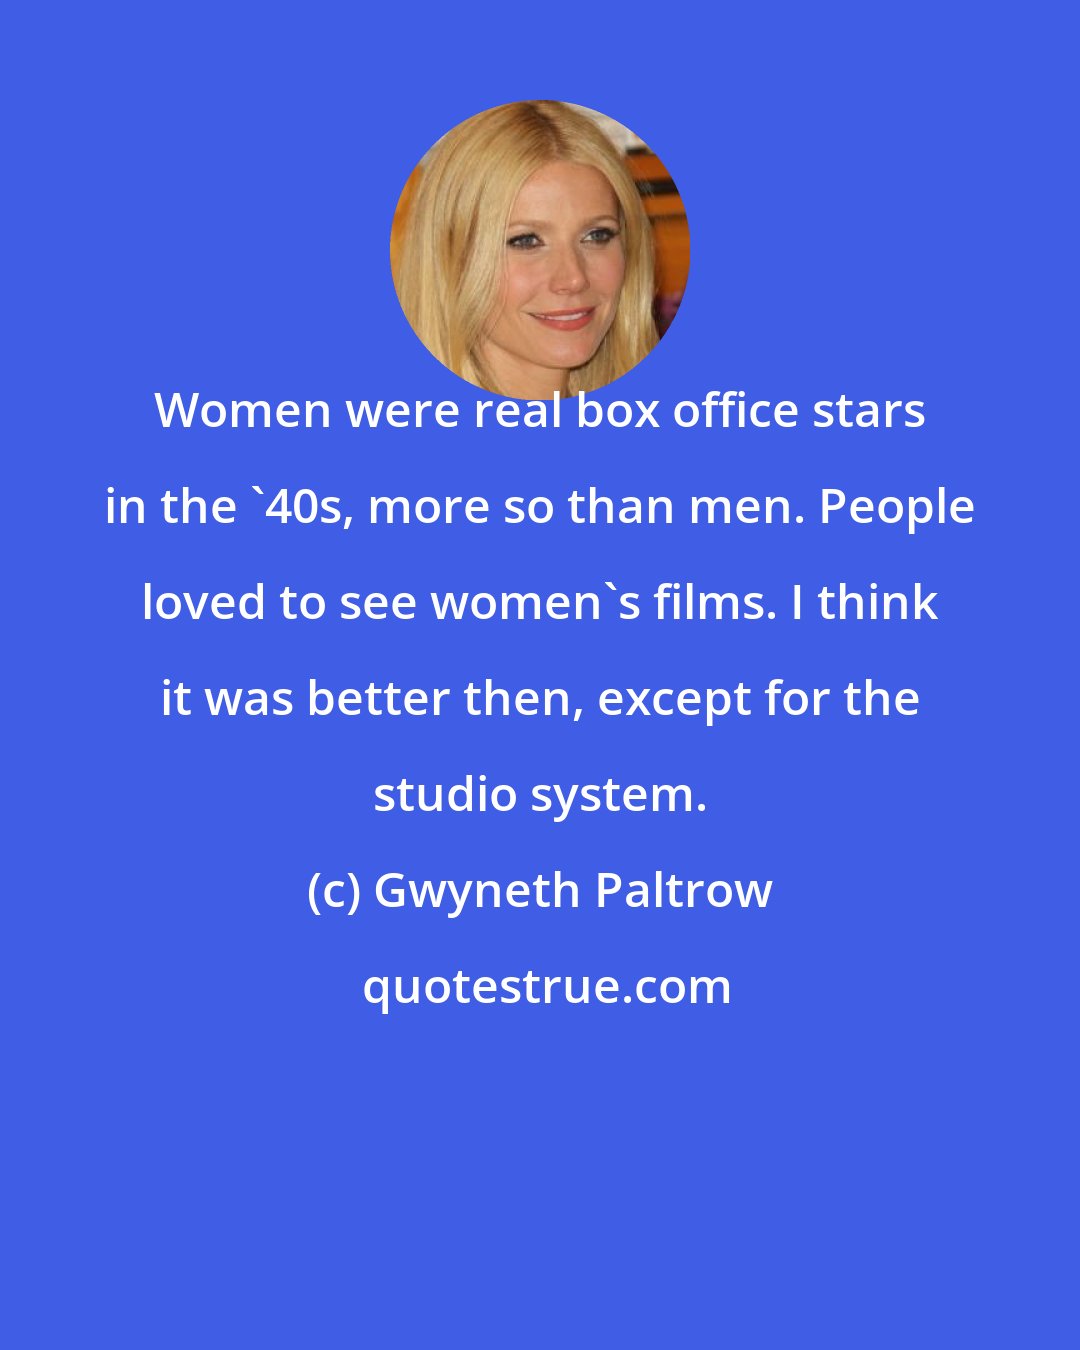 Gwyneth Paltrow: Women were real box office stars in the '40s, more so than men. People loved to see women's films. I think it was better then, except for the studio system.